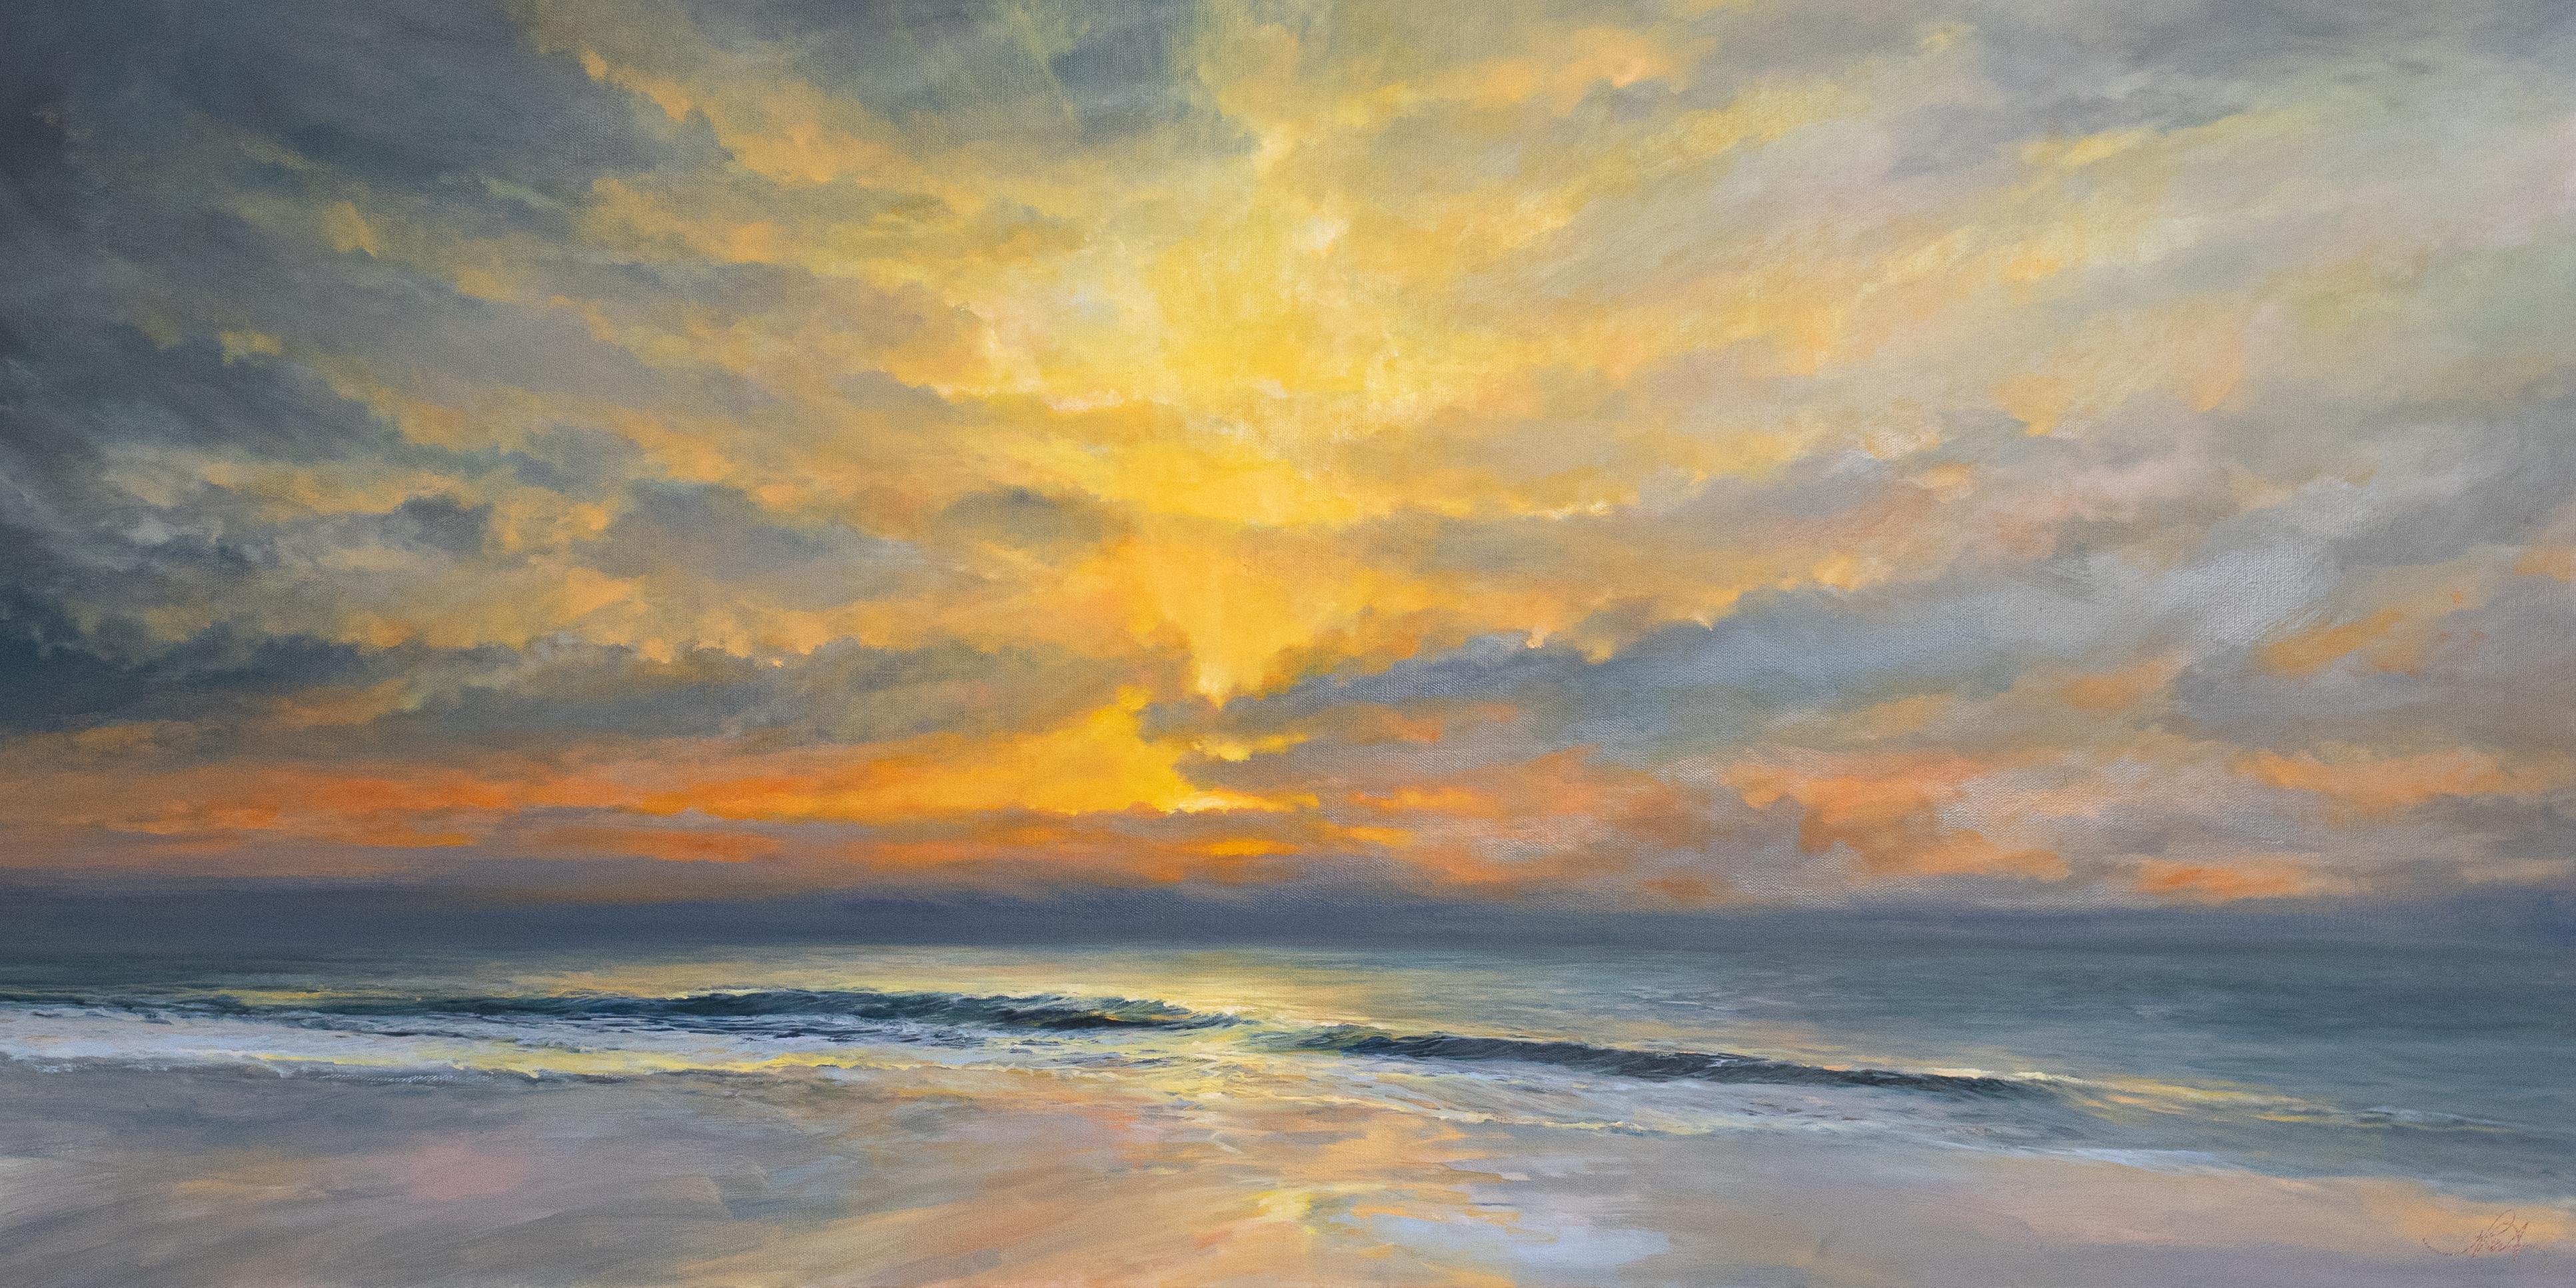 Prelude-original realism seascape ocean-sunset oil painting-contemporary Art - Painting by Joanne Parent